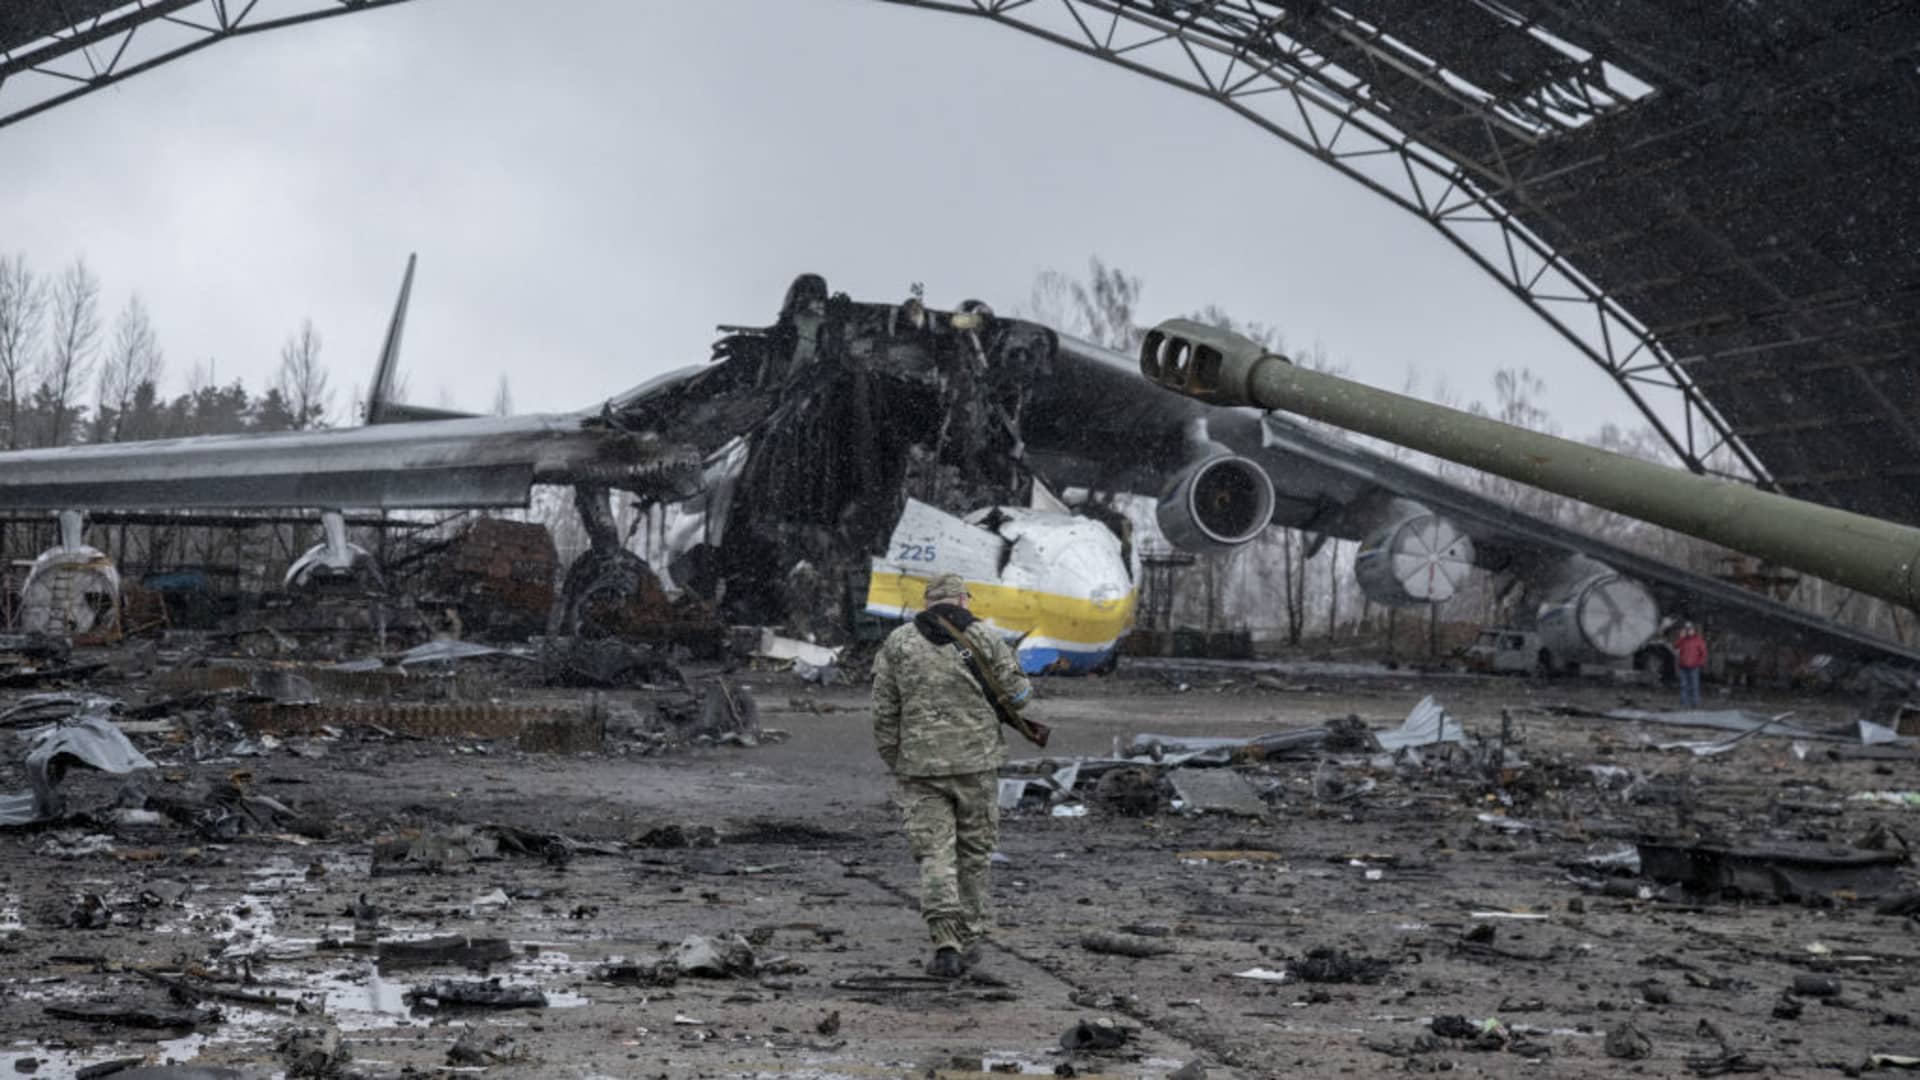 A Ukrainian serviceman walks by the wreckage of a cargo aircraft at the military airport in the town of Hostomel, on the outskirts of Kyiv, on April 3, 2022.